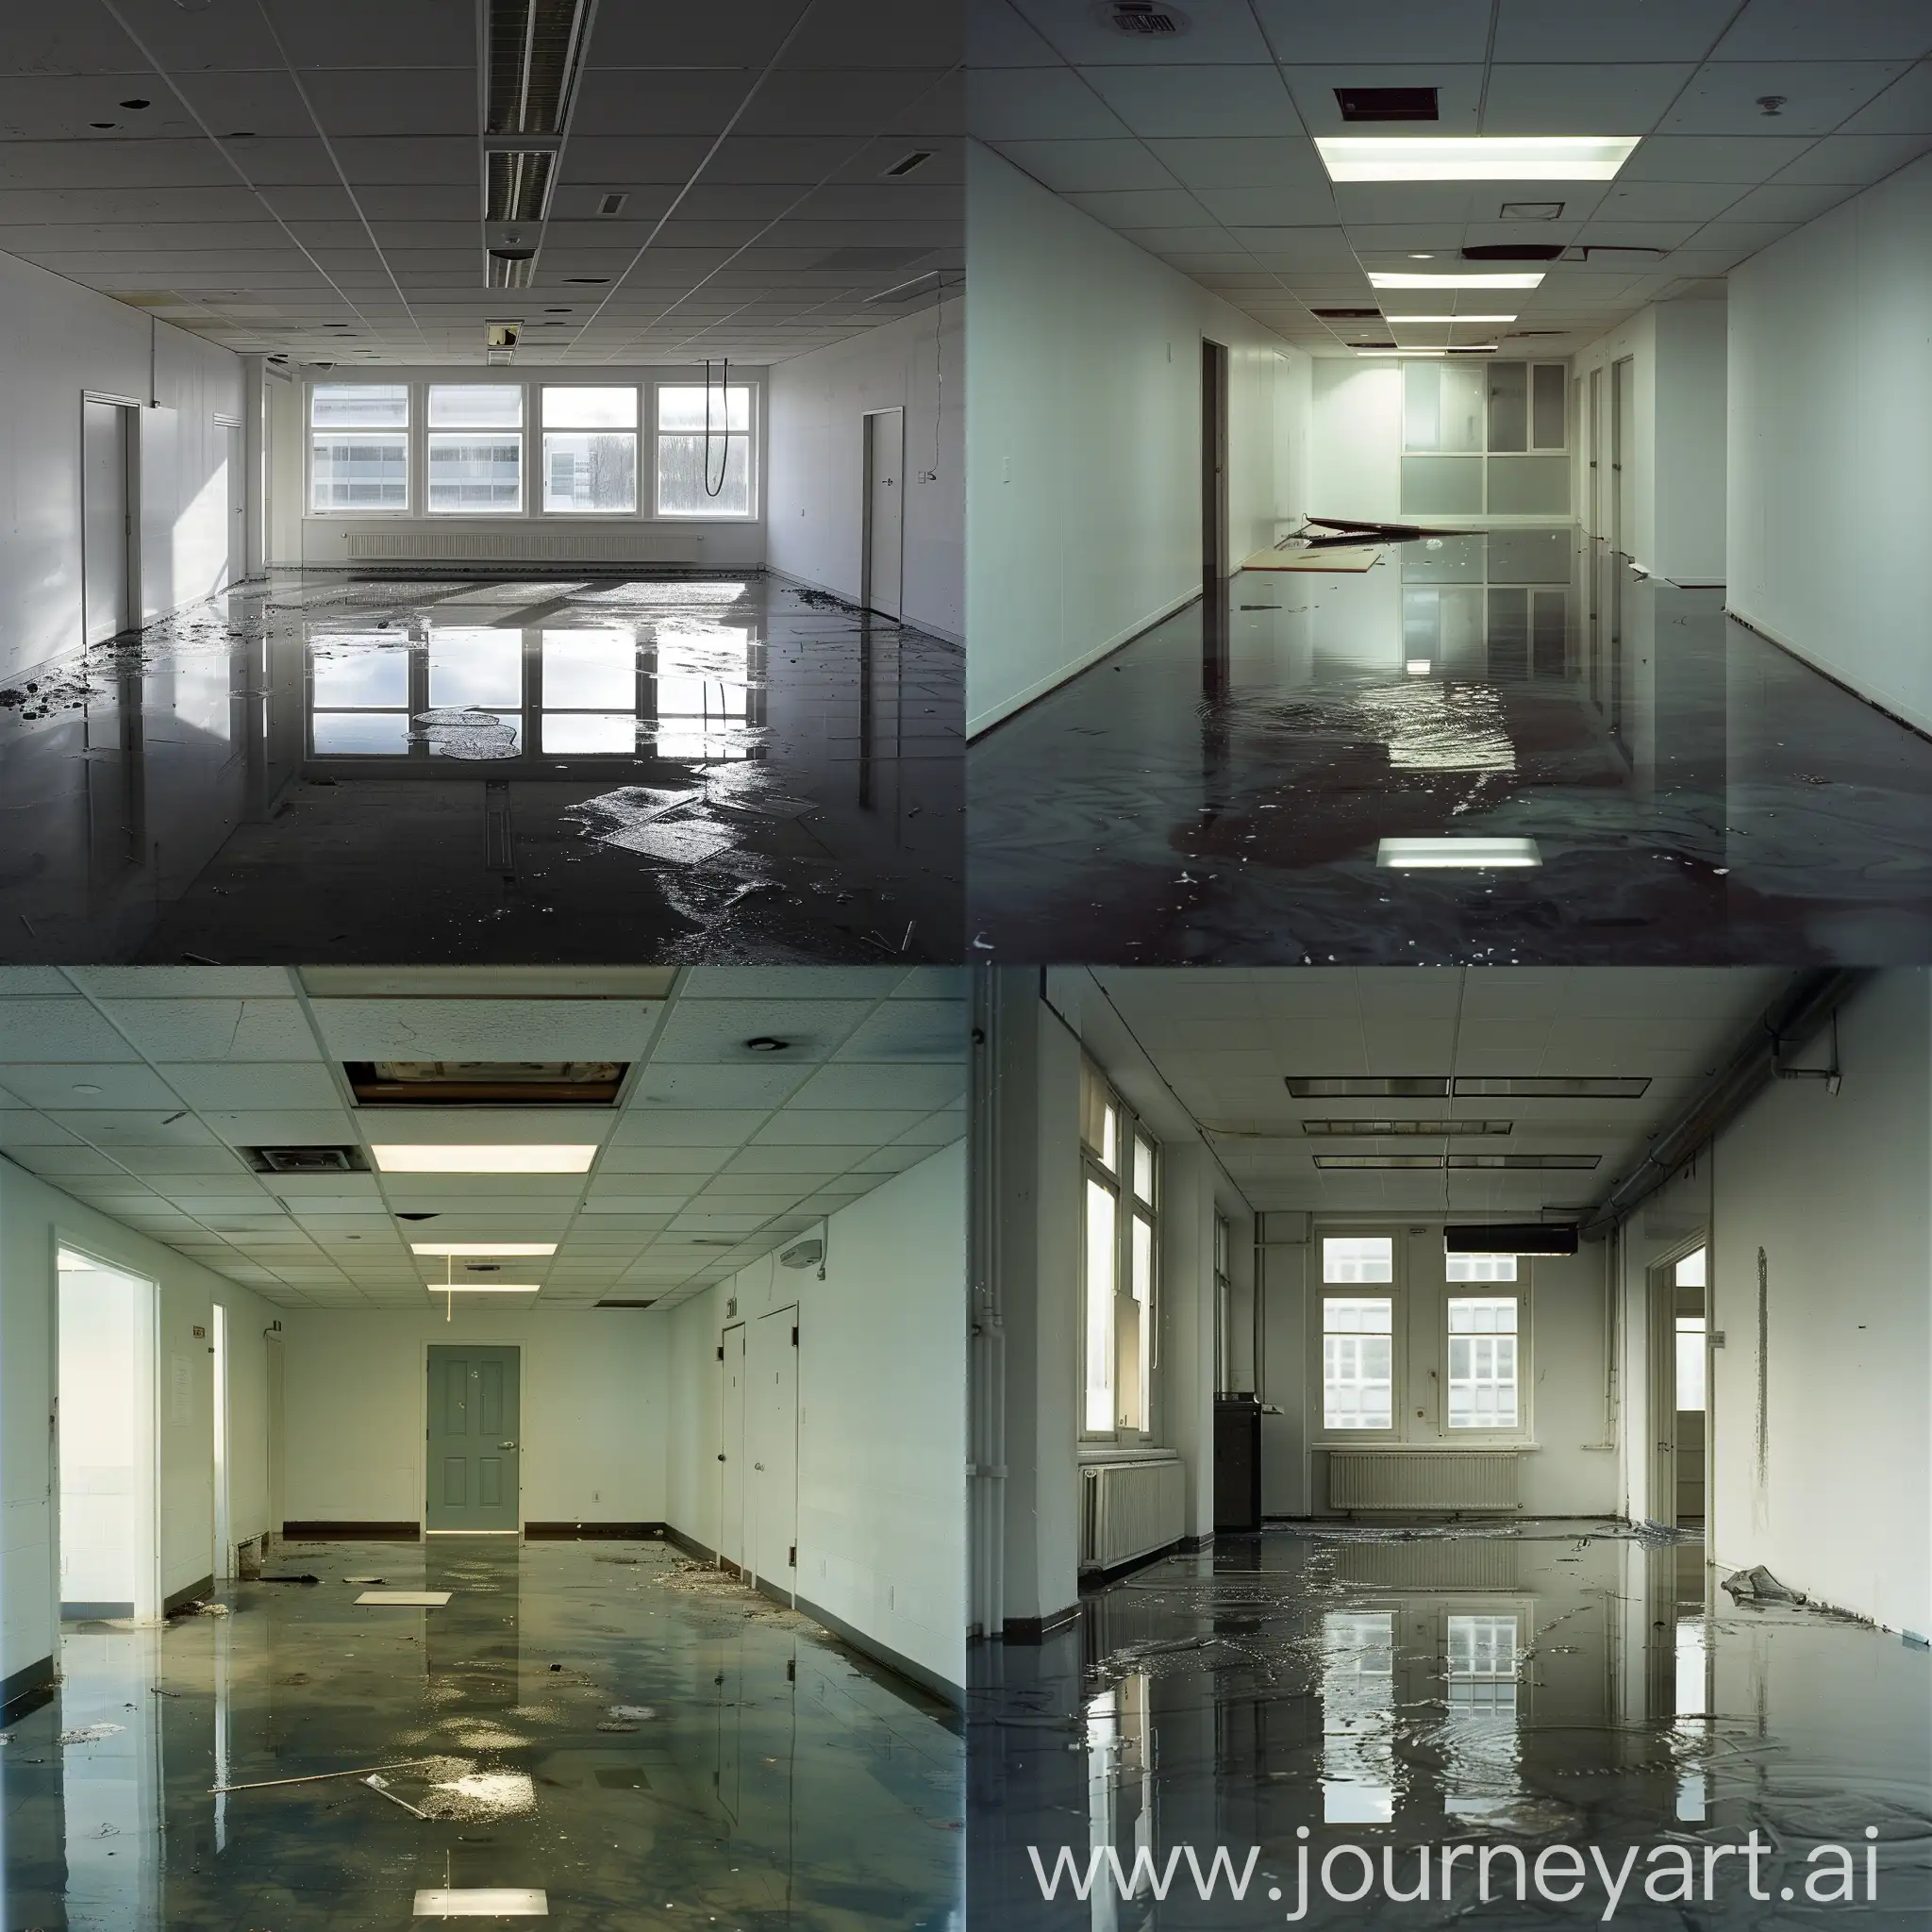 Liminal-Empty-Office-Room-with-Flooding-Dreamcore-Aesthetic